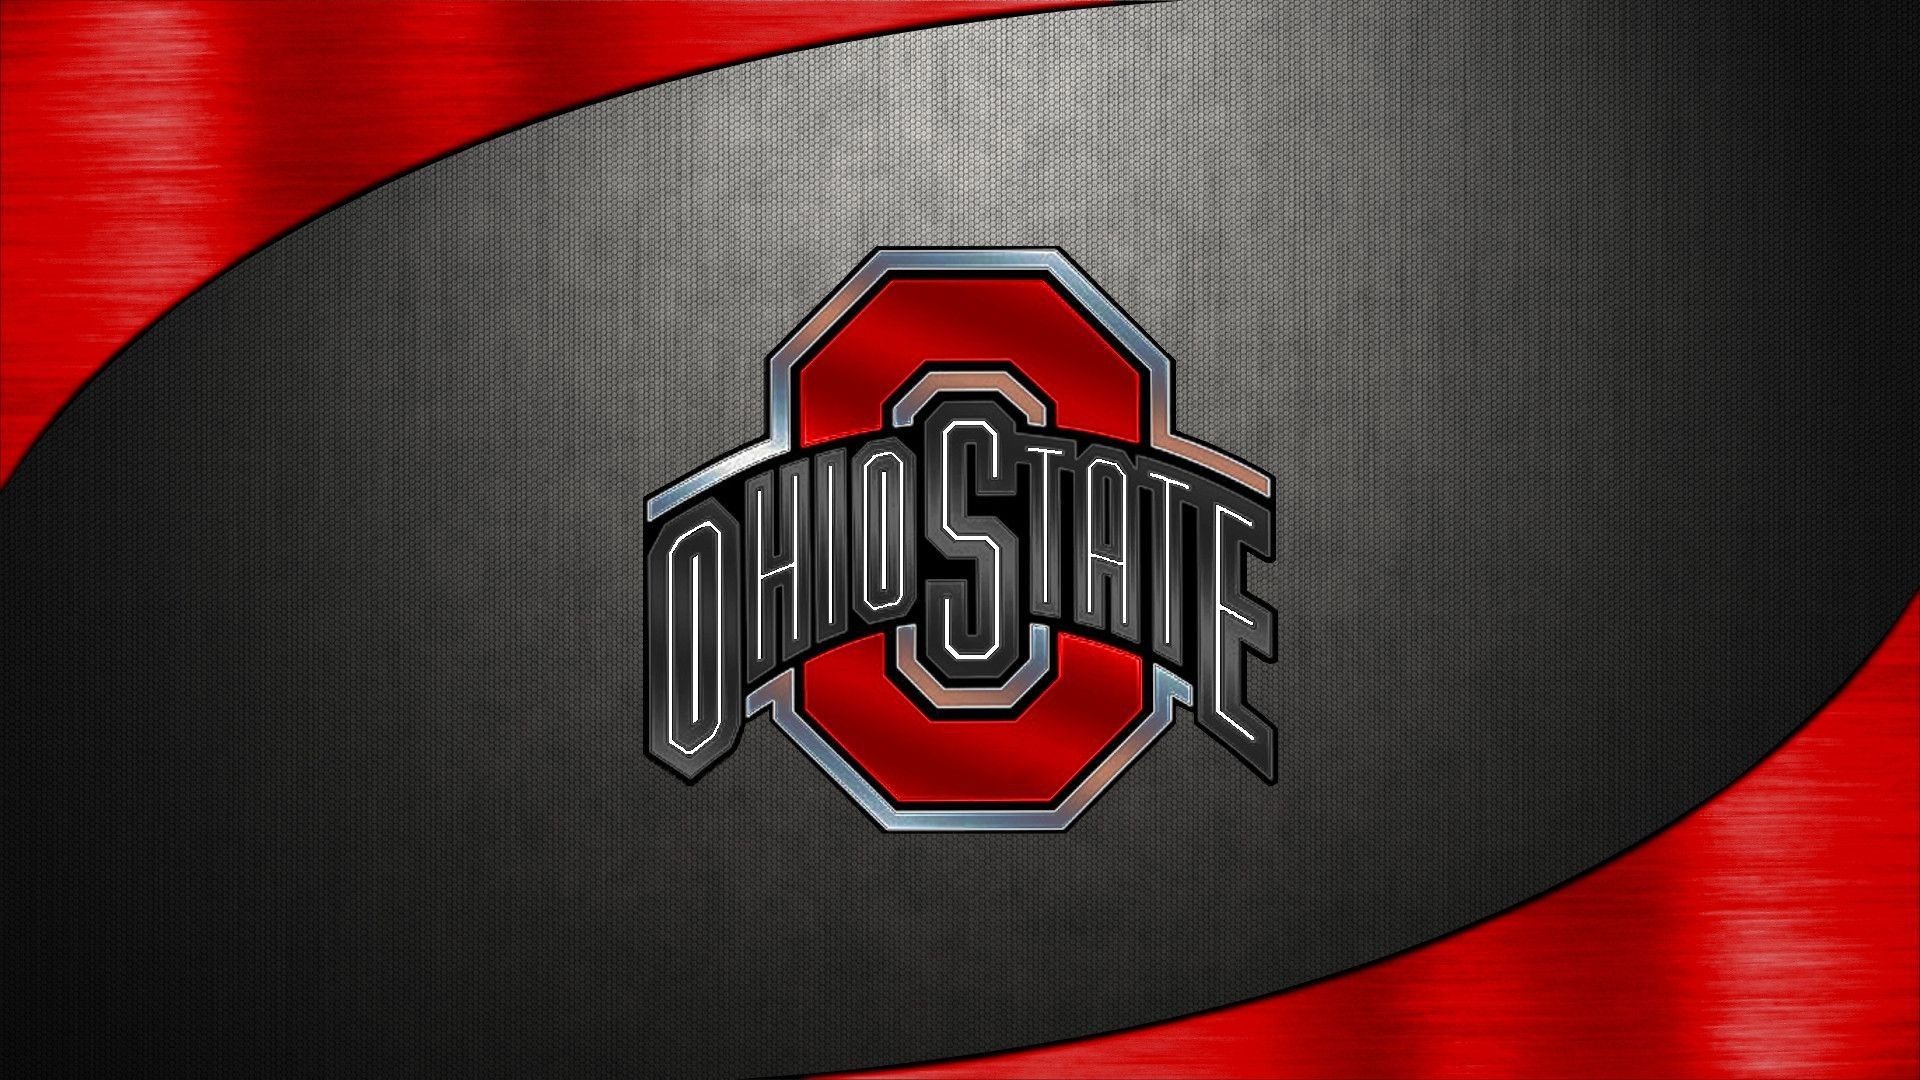 1920x1080 Image Name: Ohio State Football OSU Desktop Wallpaper Ohio State Backgrounds  Wallpapers)